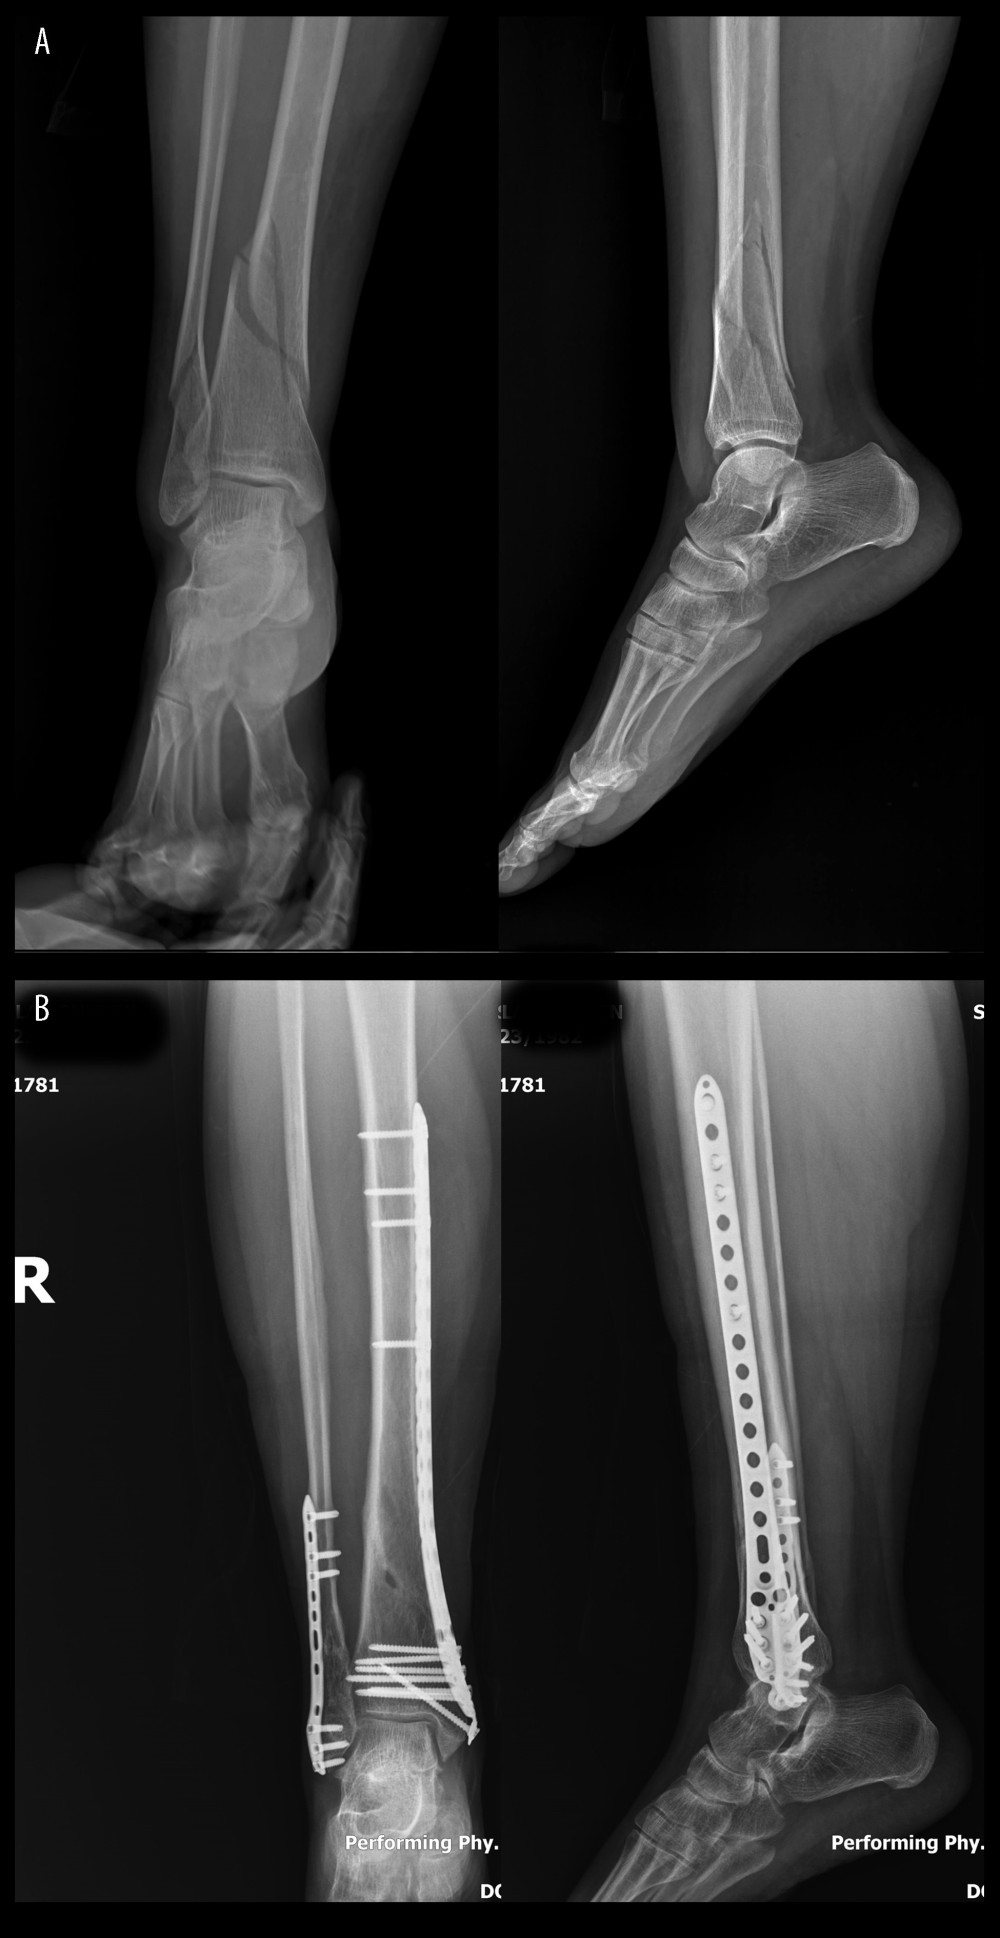 (A) Preoperative and (B) postoperative plain radiographic views of a extraarticular distal tibial fracture treated with minimally invasive plate osteosynthesis (MIPO).